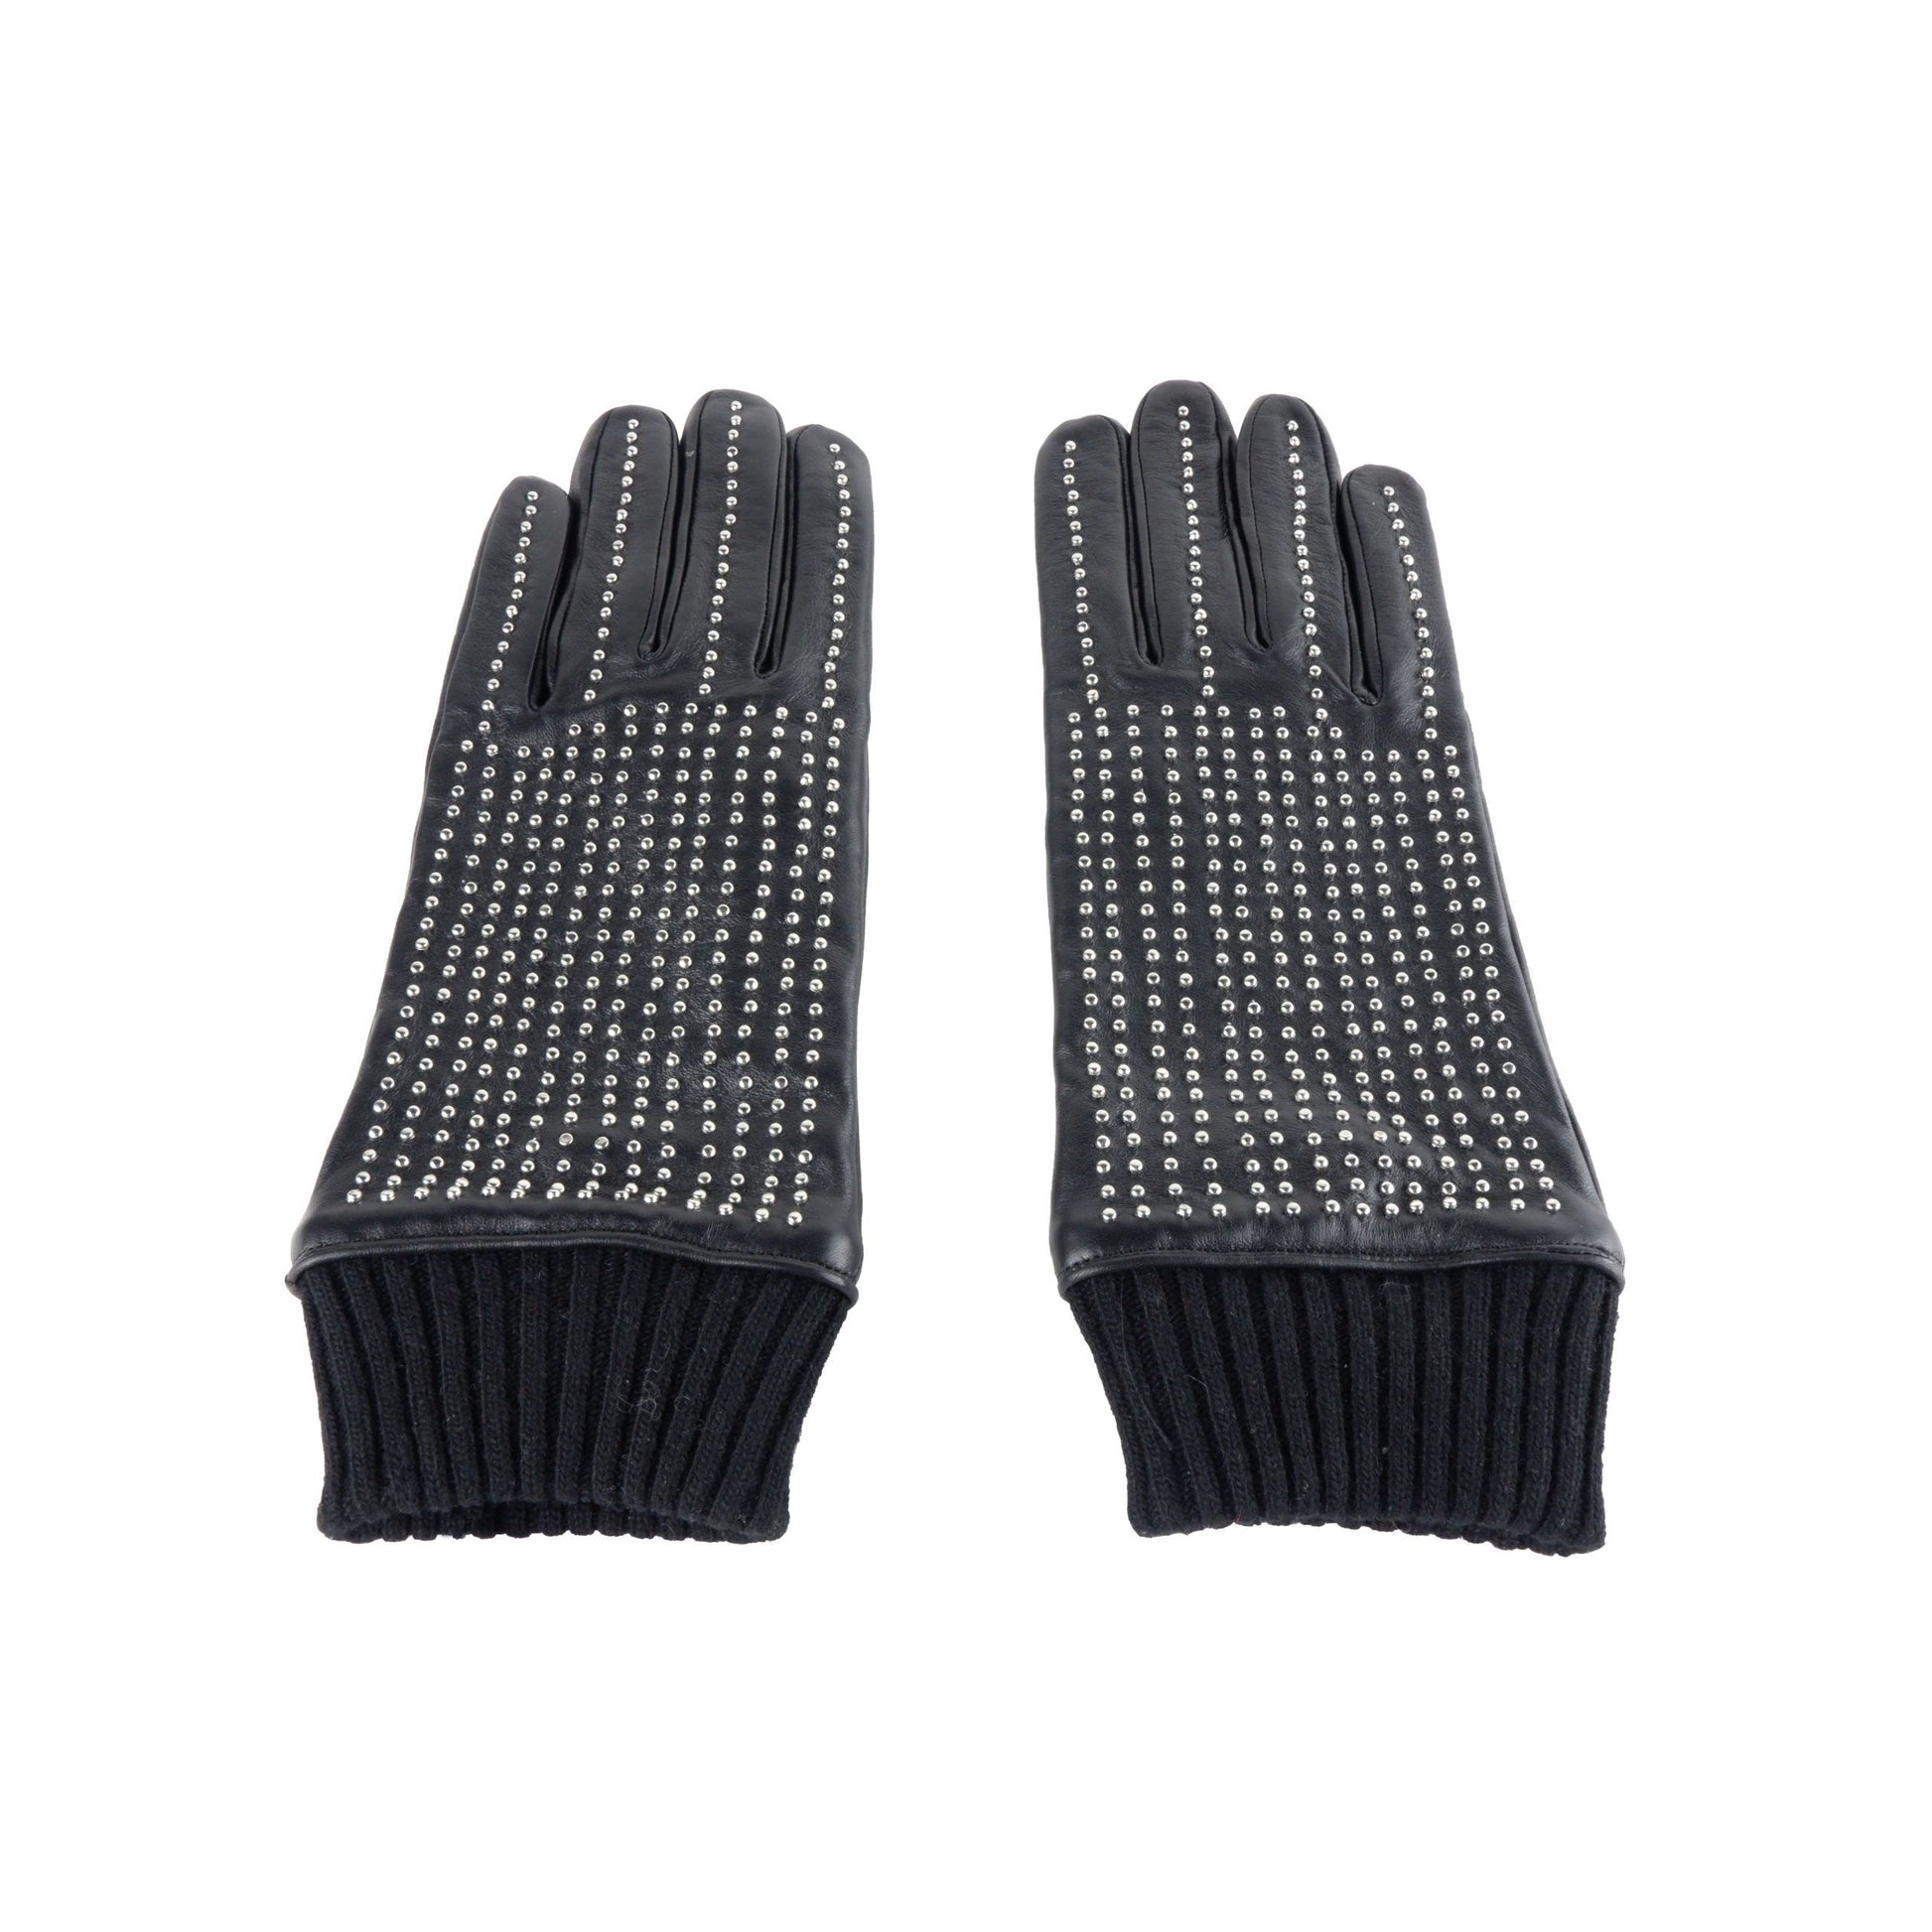 Cavalli Class Black Men's Gloves - Designed by Cavalli Class Available to Buy at a Discounted Price on Moon Behind The Hill Online Designer Discount Store